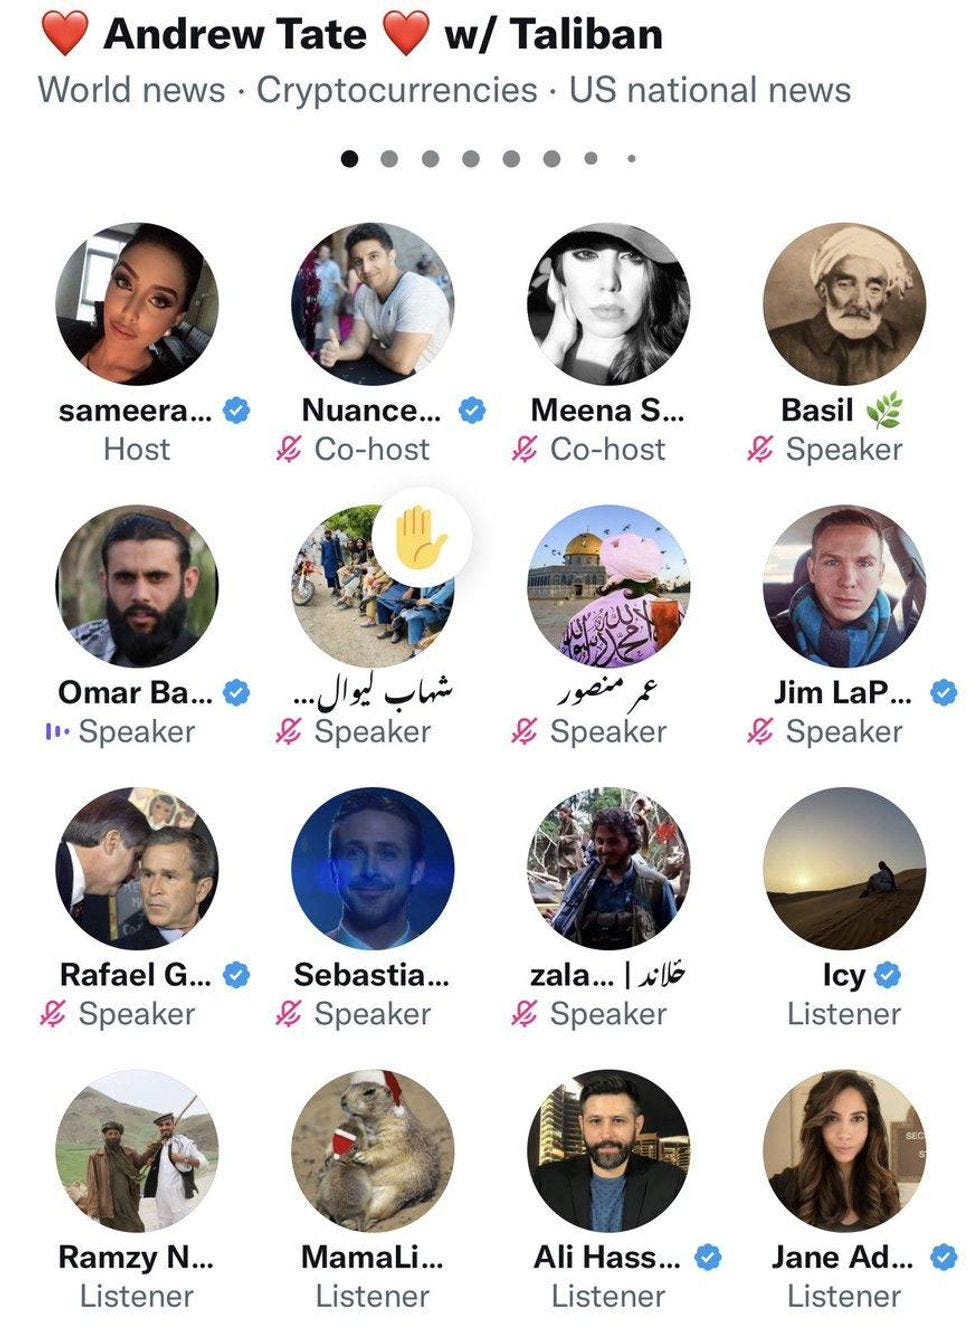 Picture of Twitter spaces featuring Sameera Khan and "the Taliban" discussing Andrew Tate